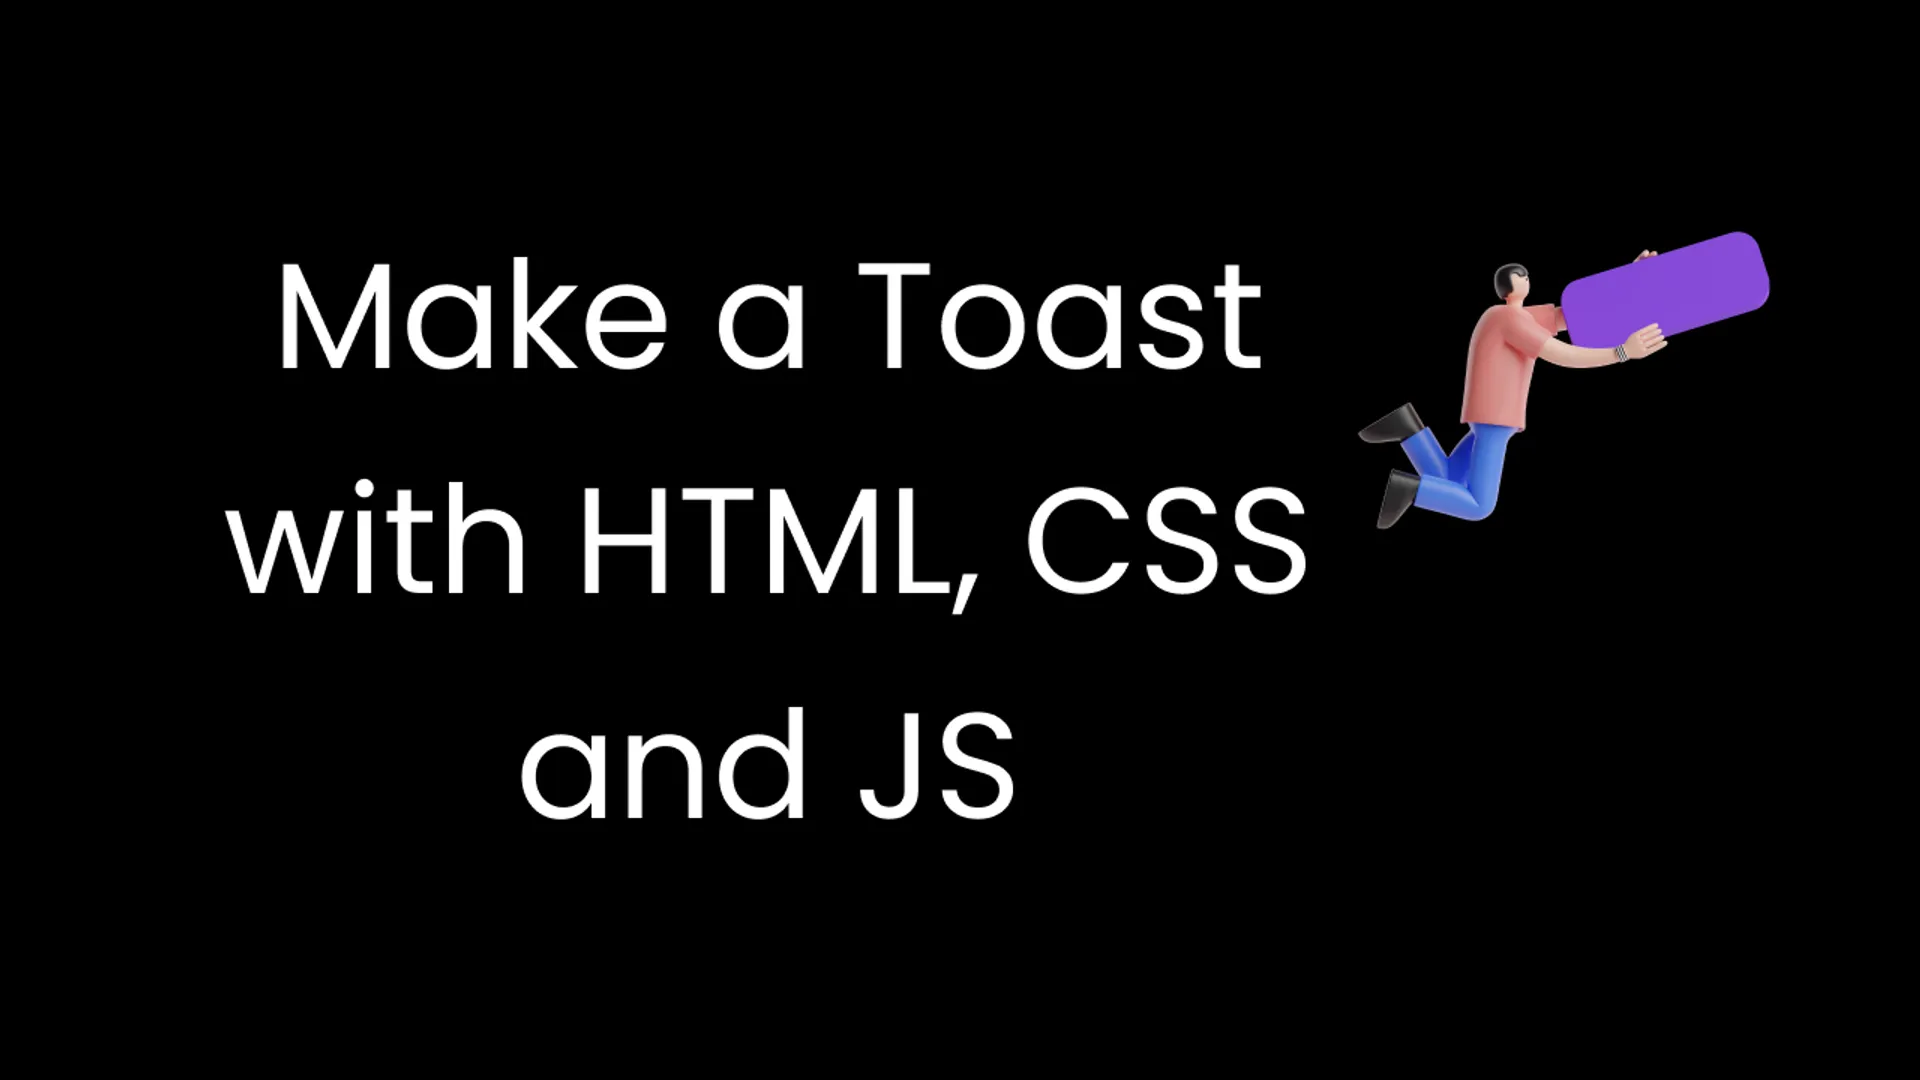 Making a toast notification with HTML, CSS, and JS